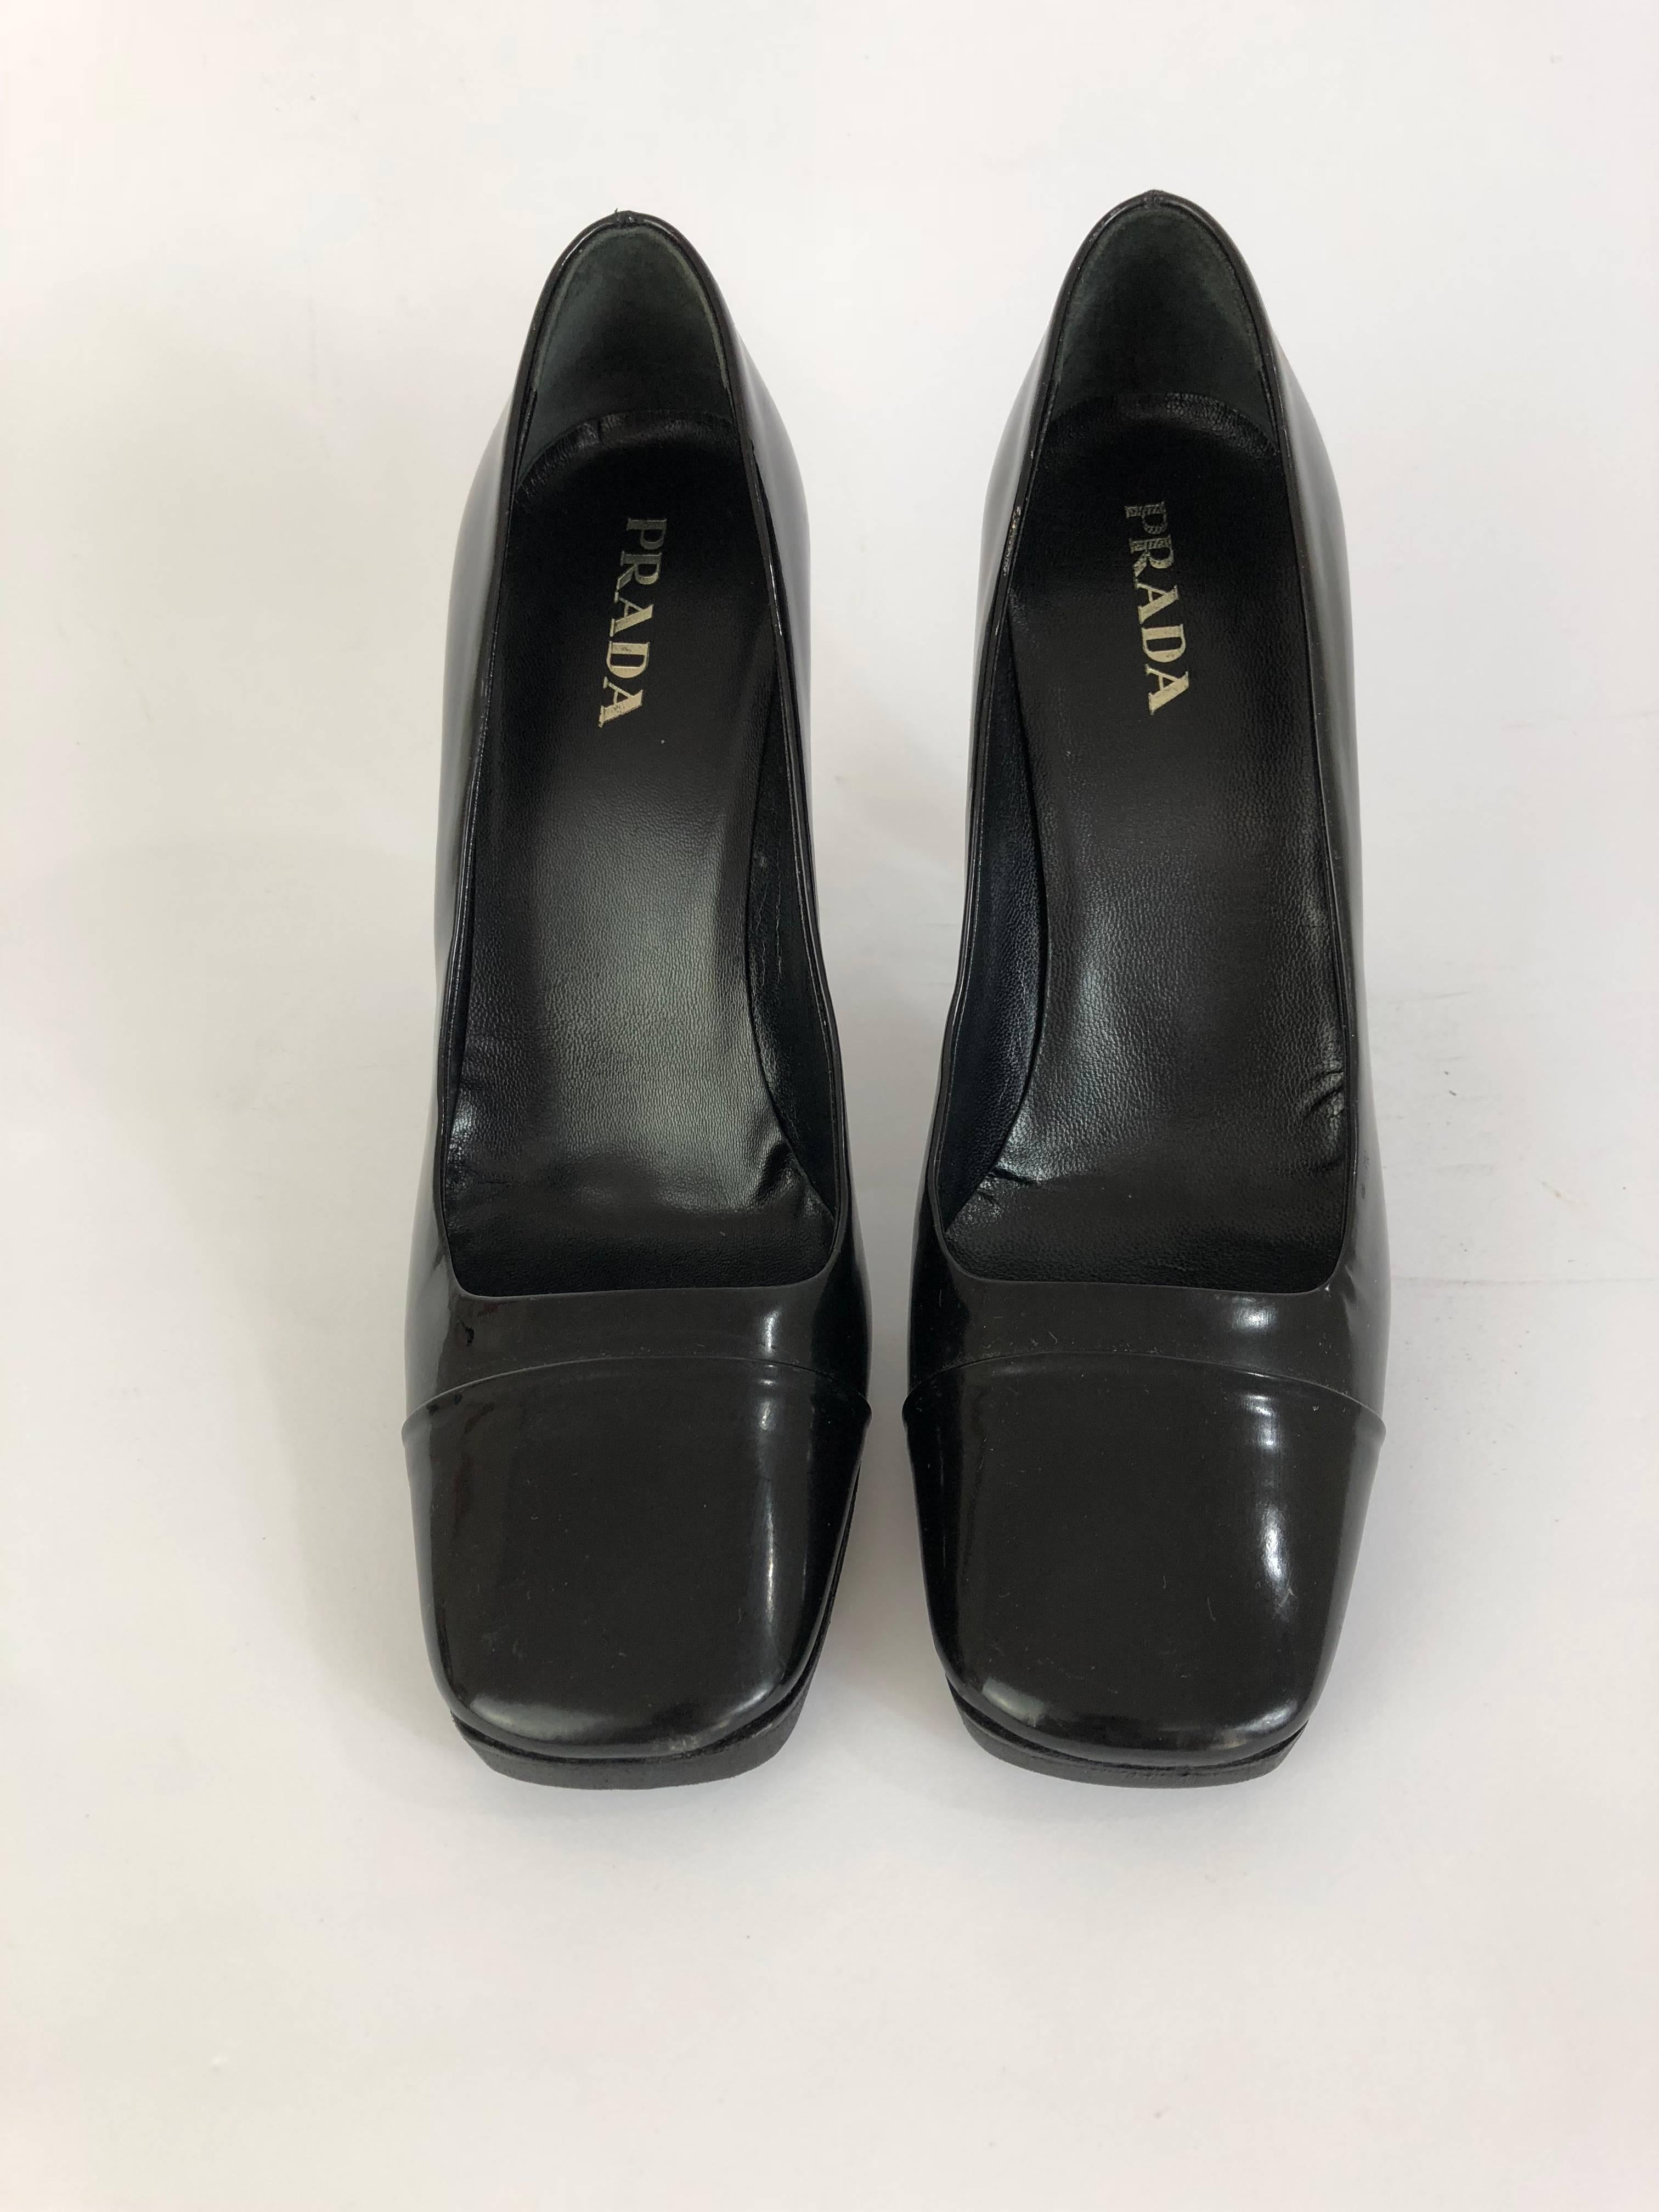 Prada Black Patent Leather Classic Pumps Italian Squared High Heels Shoes, 1990s In New Condition For Sale In Brindisi, IT